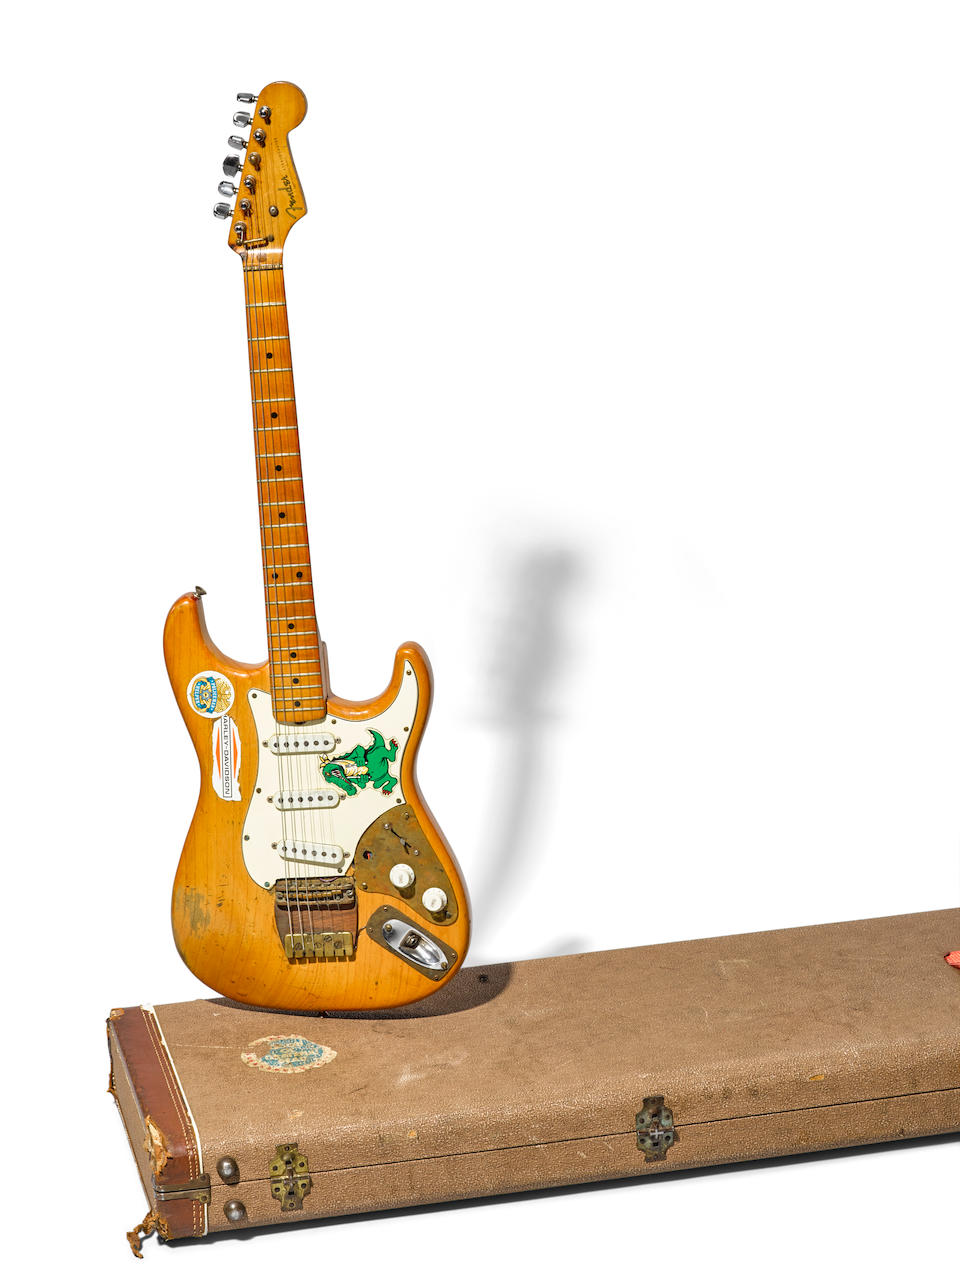 ALLIGATOR! A FENDER STRATOCASTER OWNED AND PLAYED BY JERRY GARCIA OF THE GRATEFUL DEAD